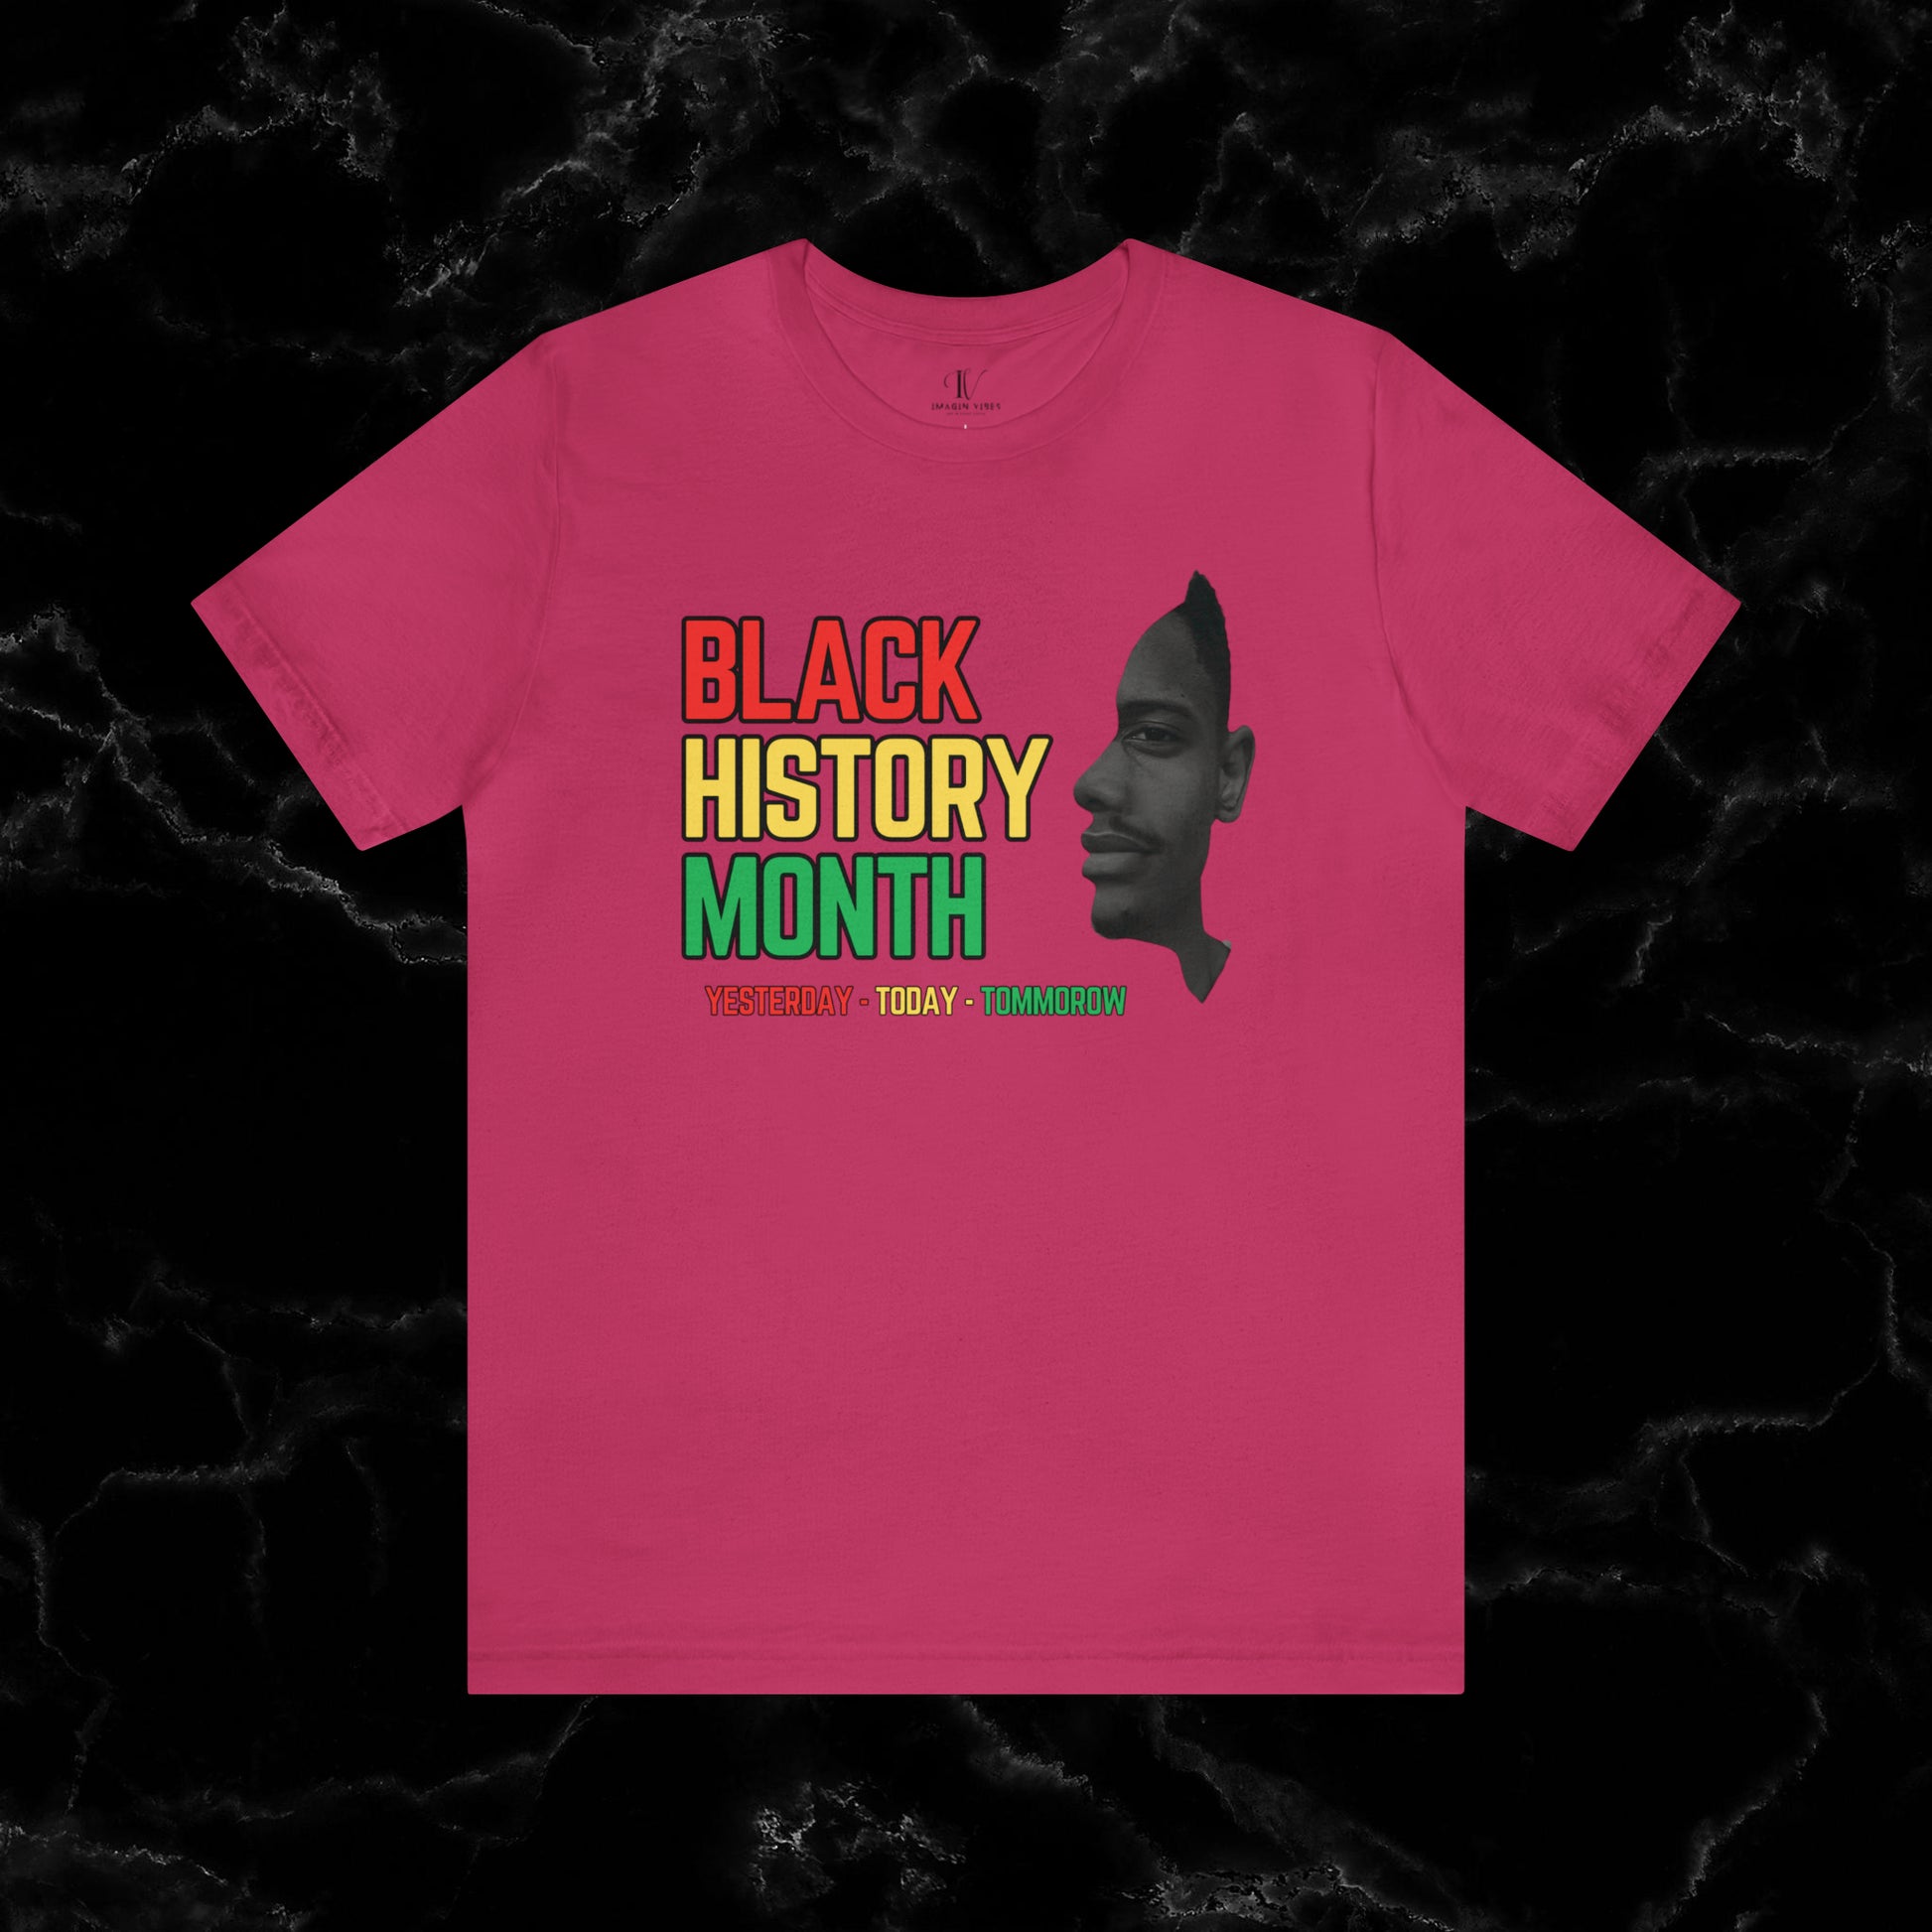 Empowering Black History Month Shirt - Yesterday, Today, Tomorrow - African American Pride T-Shirt Berry XS 